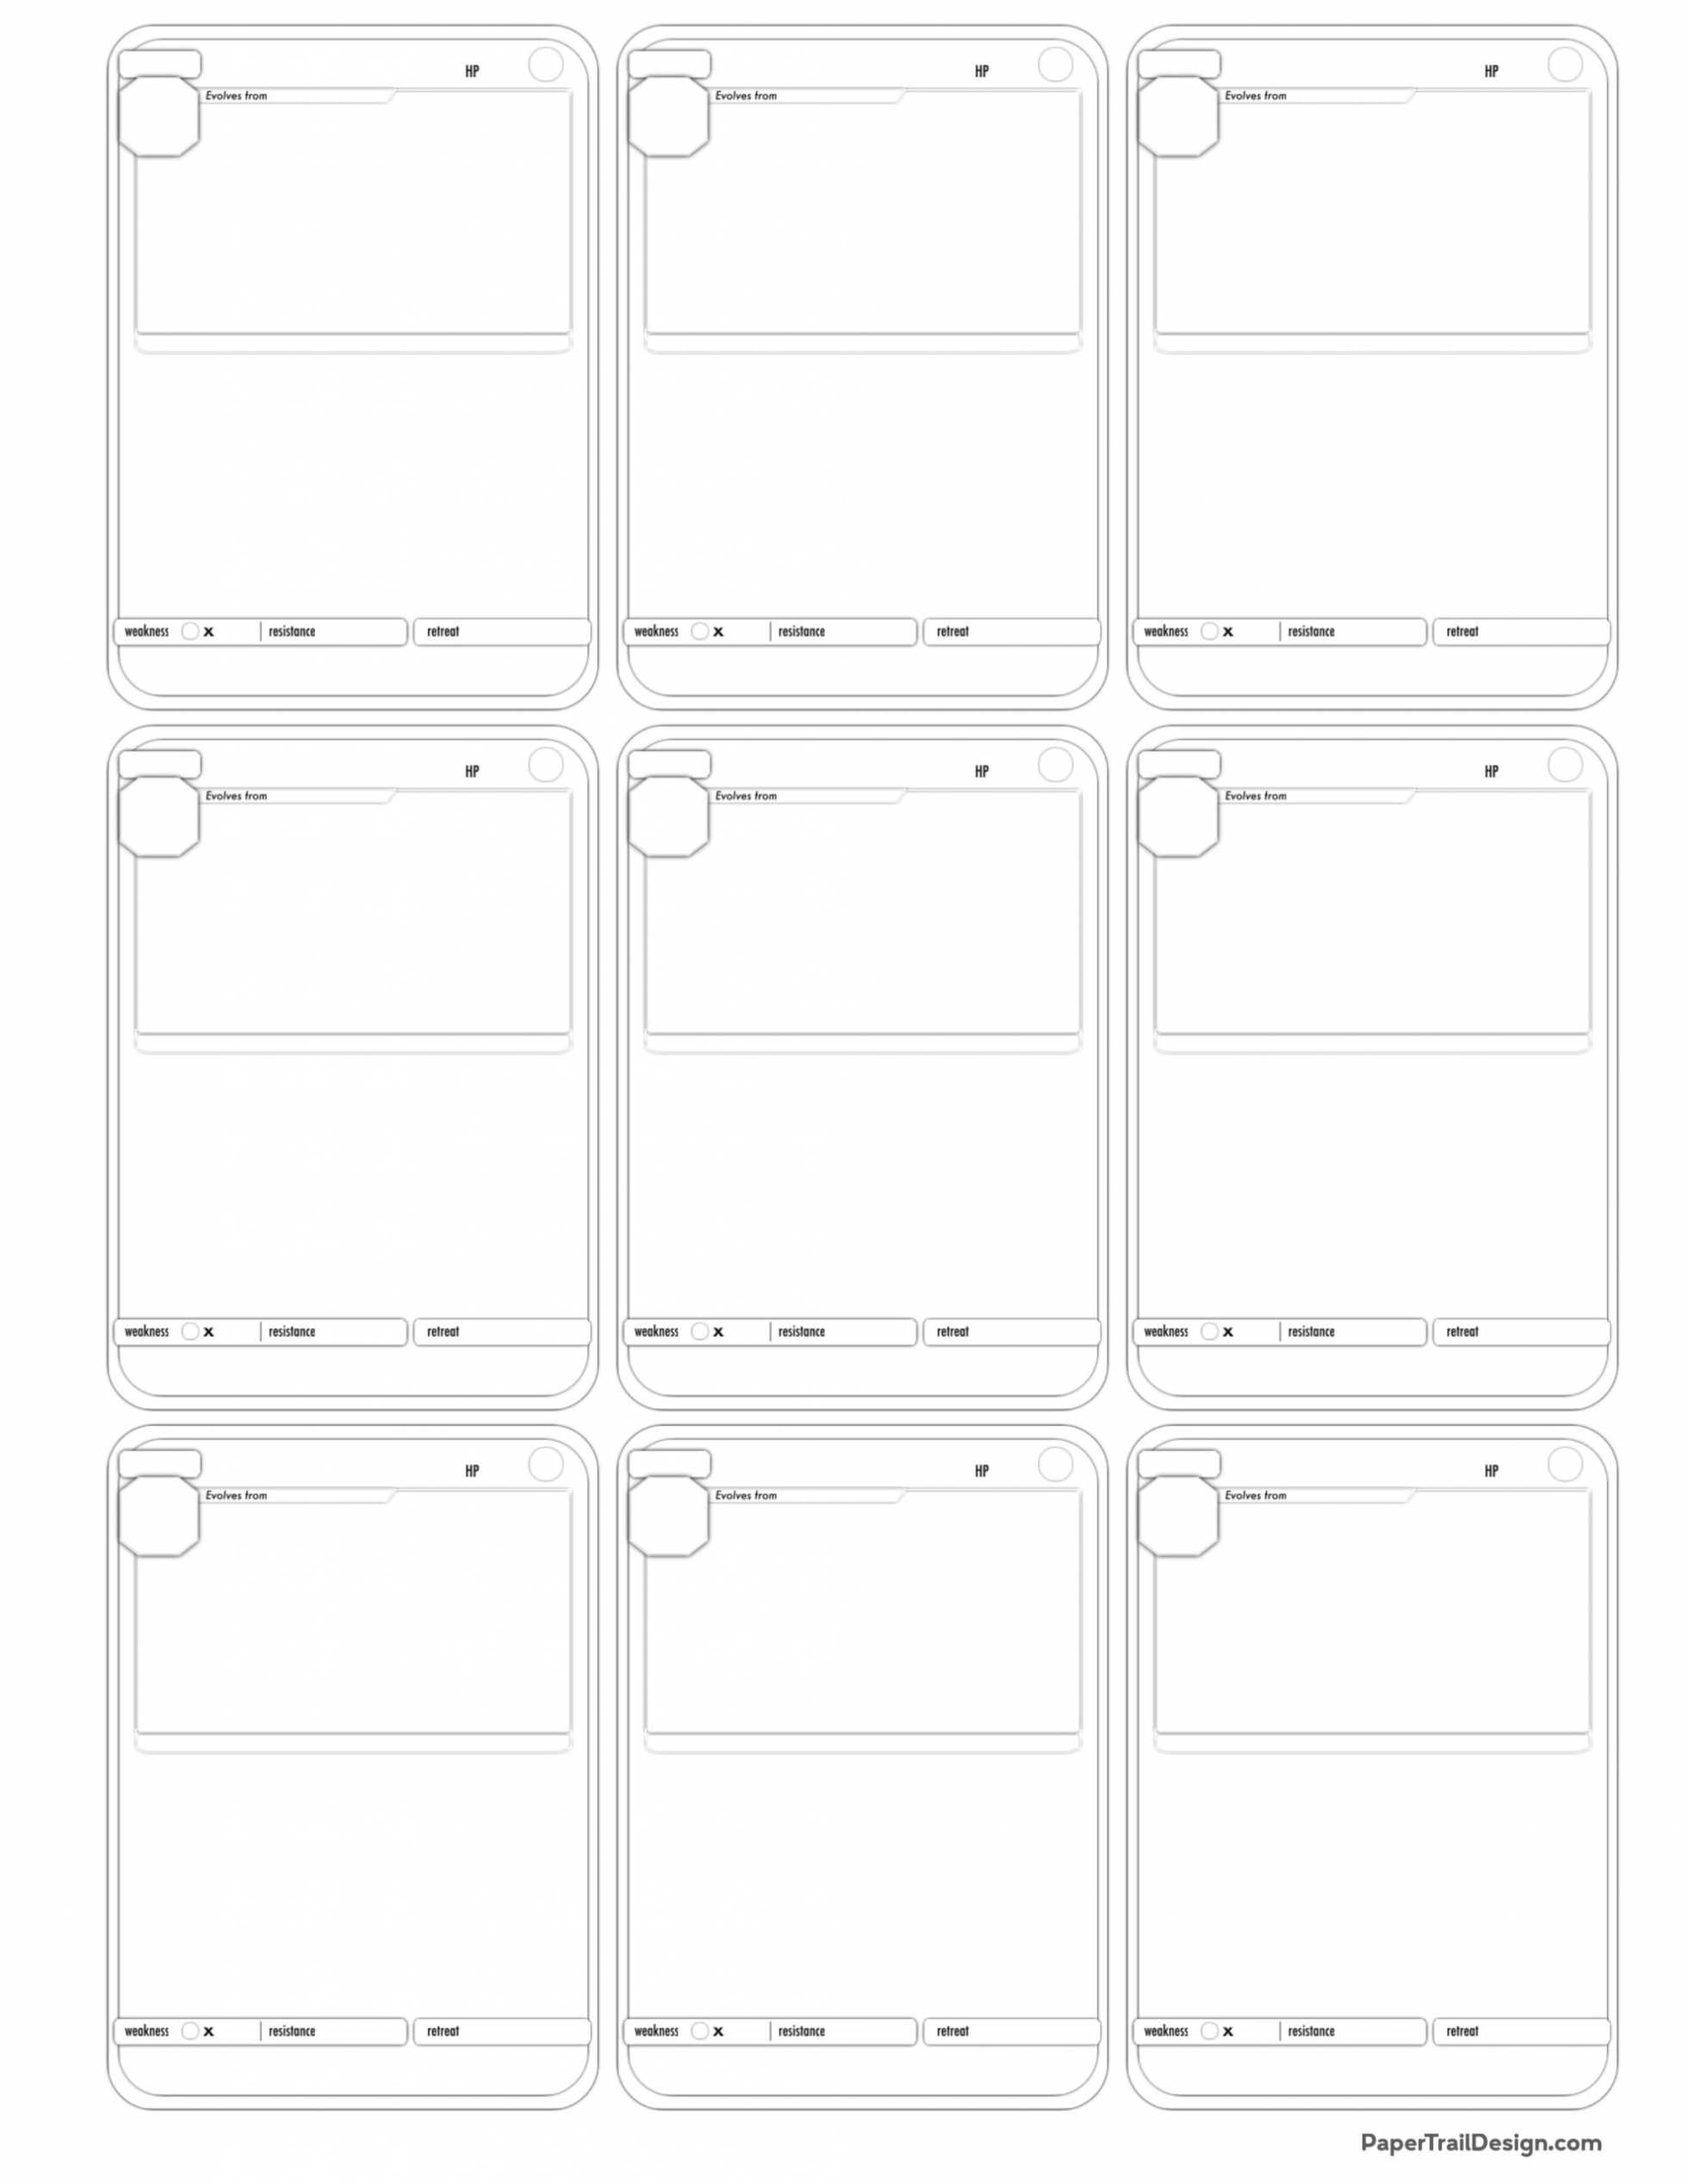 Pokemon Trainer Card Template - Creative Inspirational Template Examples